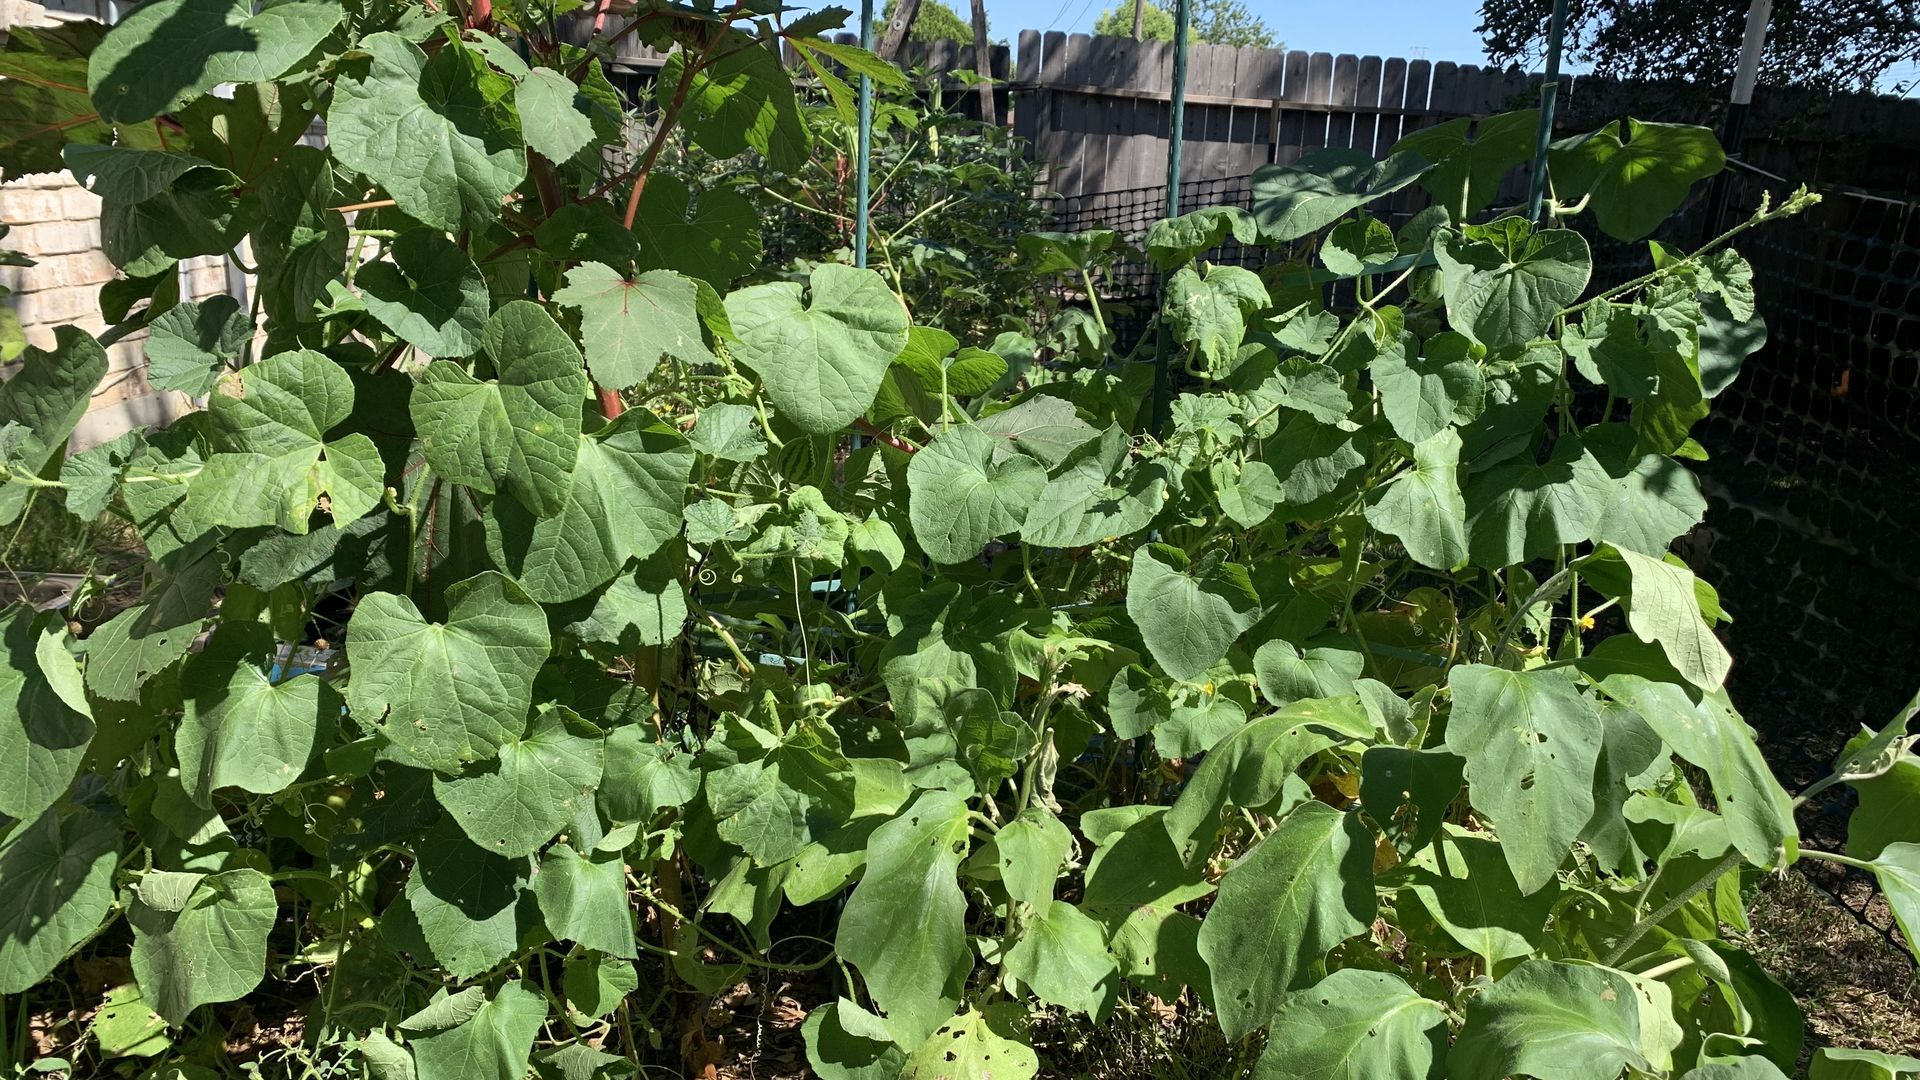 My out-of-control garden is still producing cucumbers, okra, peppers, and eggplants. Photo: Shafaq/Axios